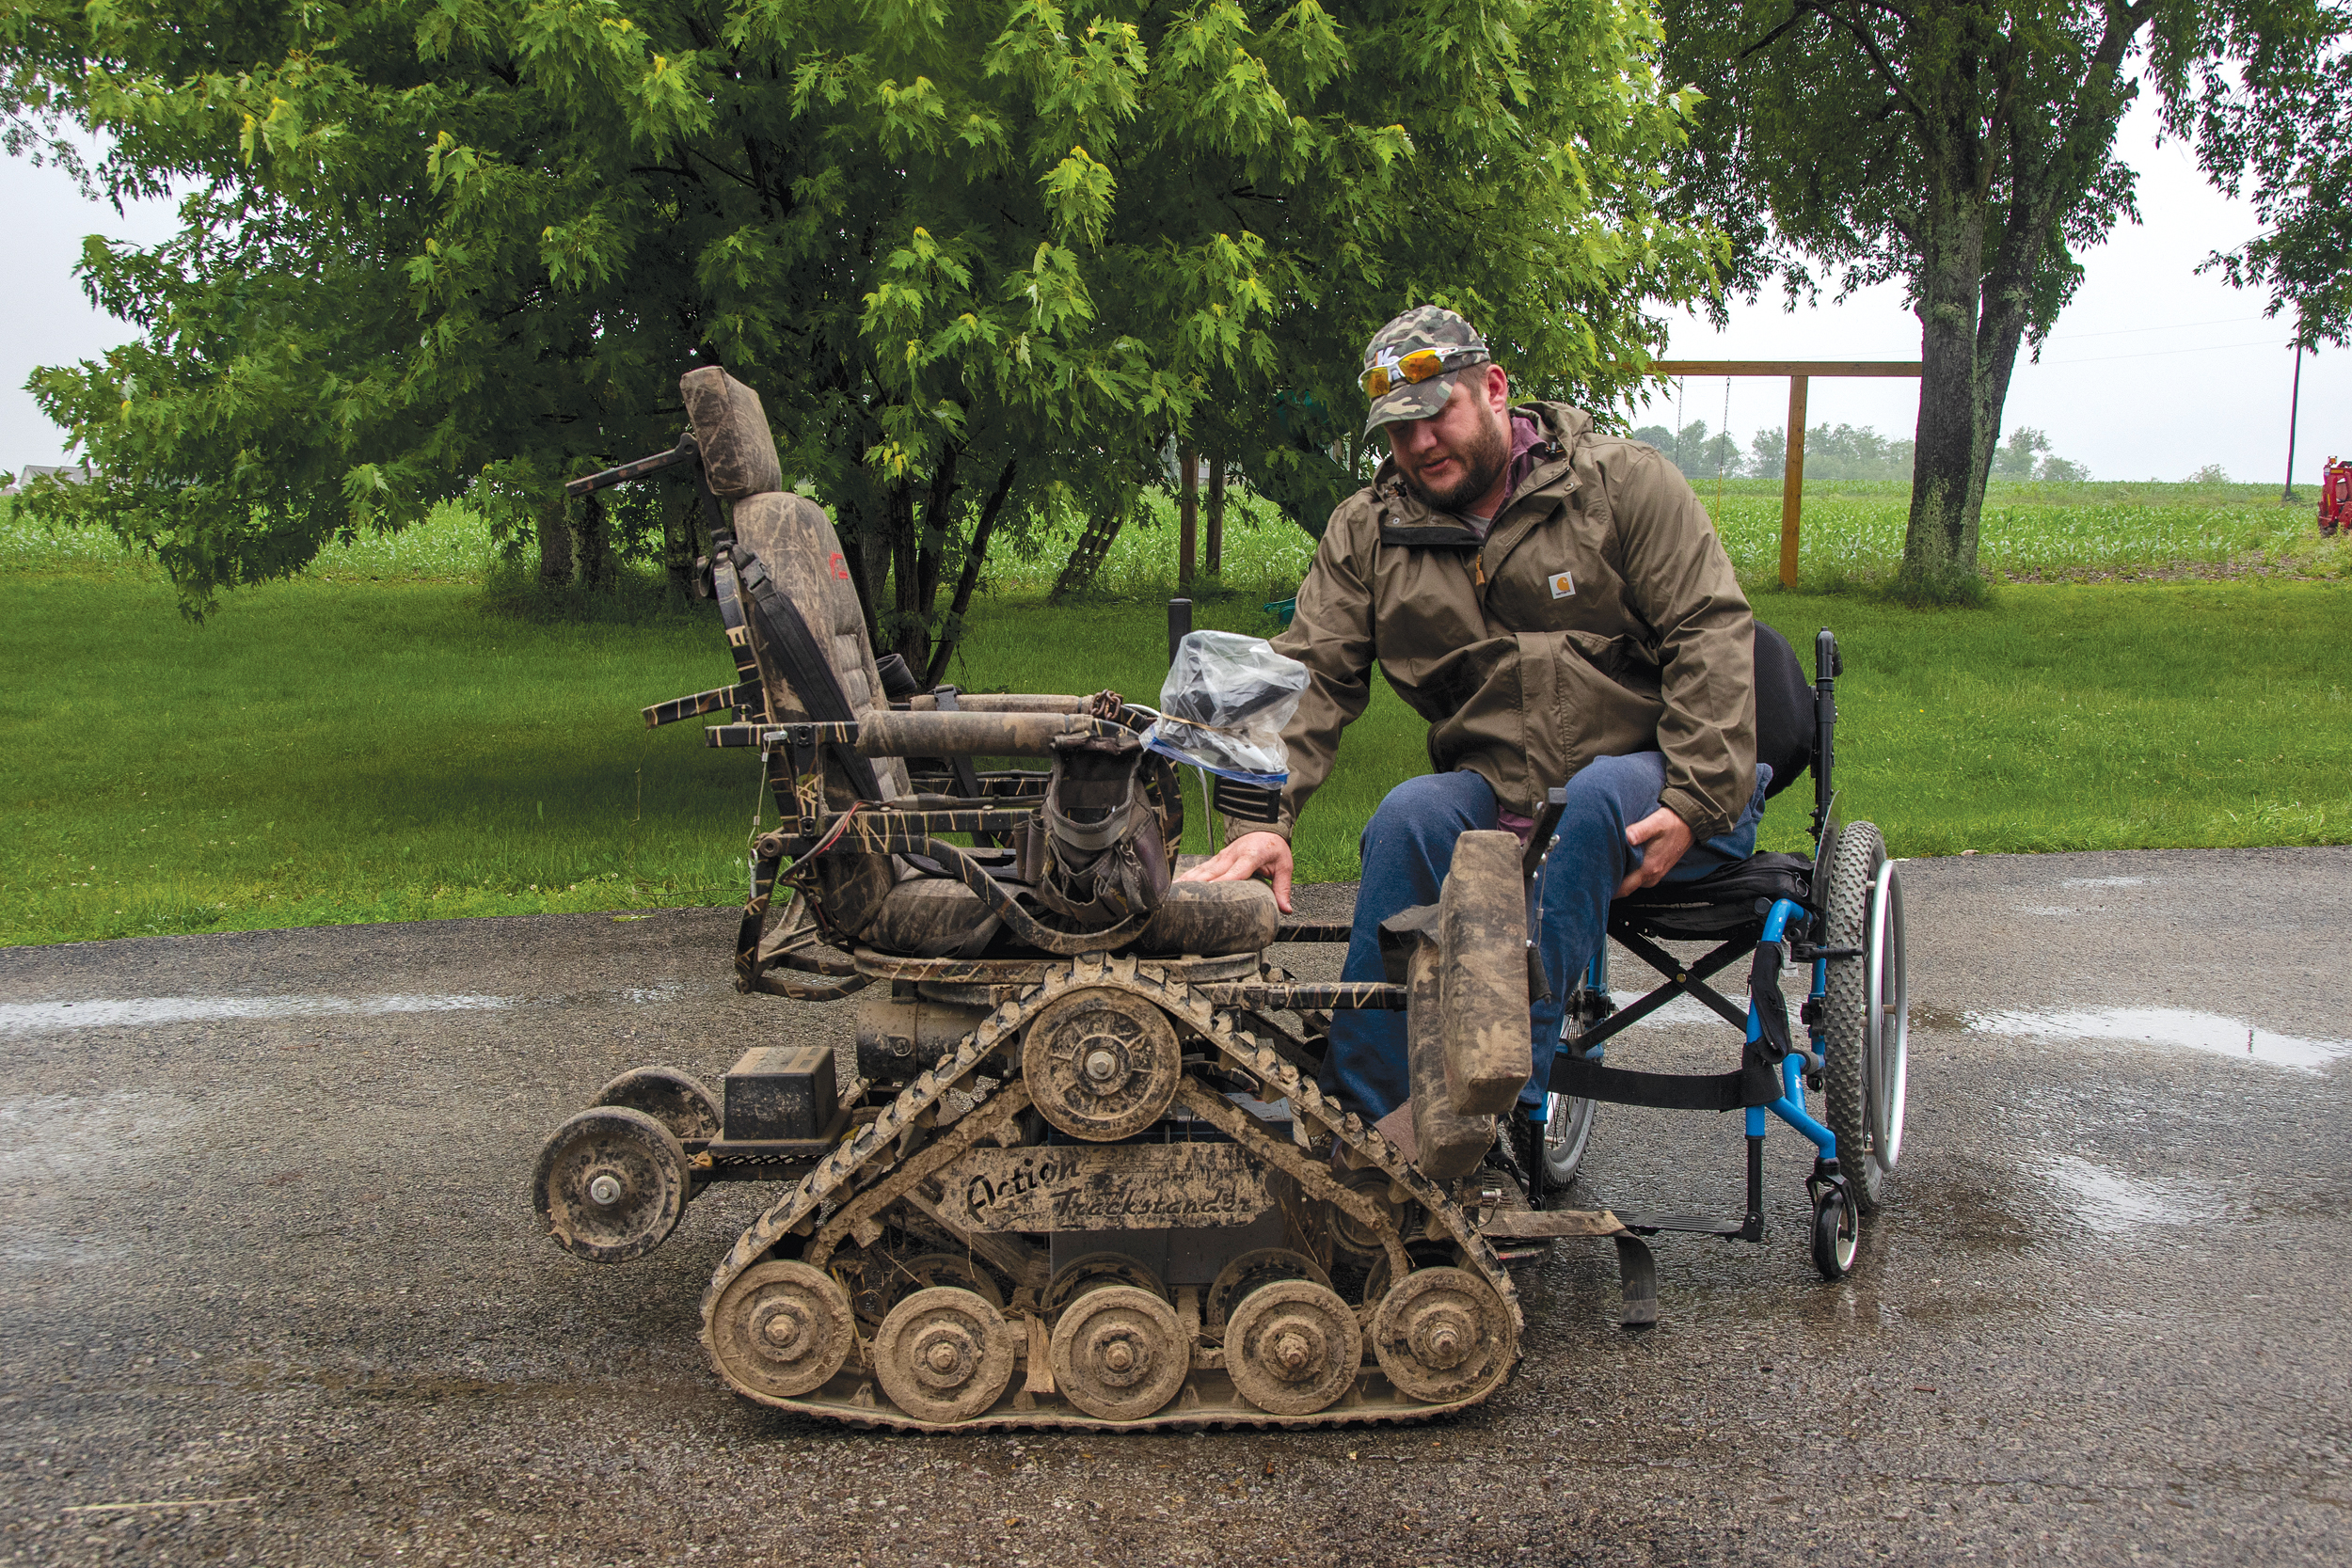 Ryan Frye, co-owner of RDR Farms in Blairsville and a member of Indiana-based REA Energy Cooperative, begins to lift himself out of his manual wheelchair into a mechanized, all-terrain wheelchair.